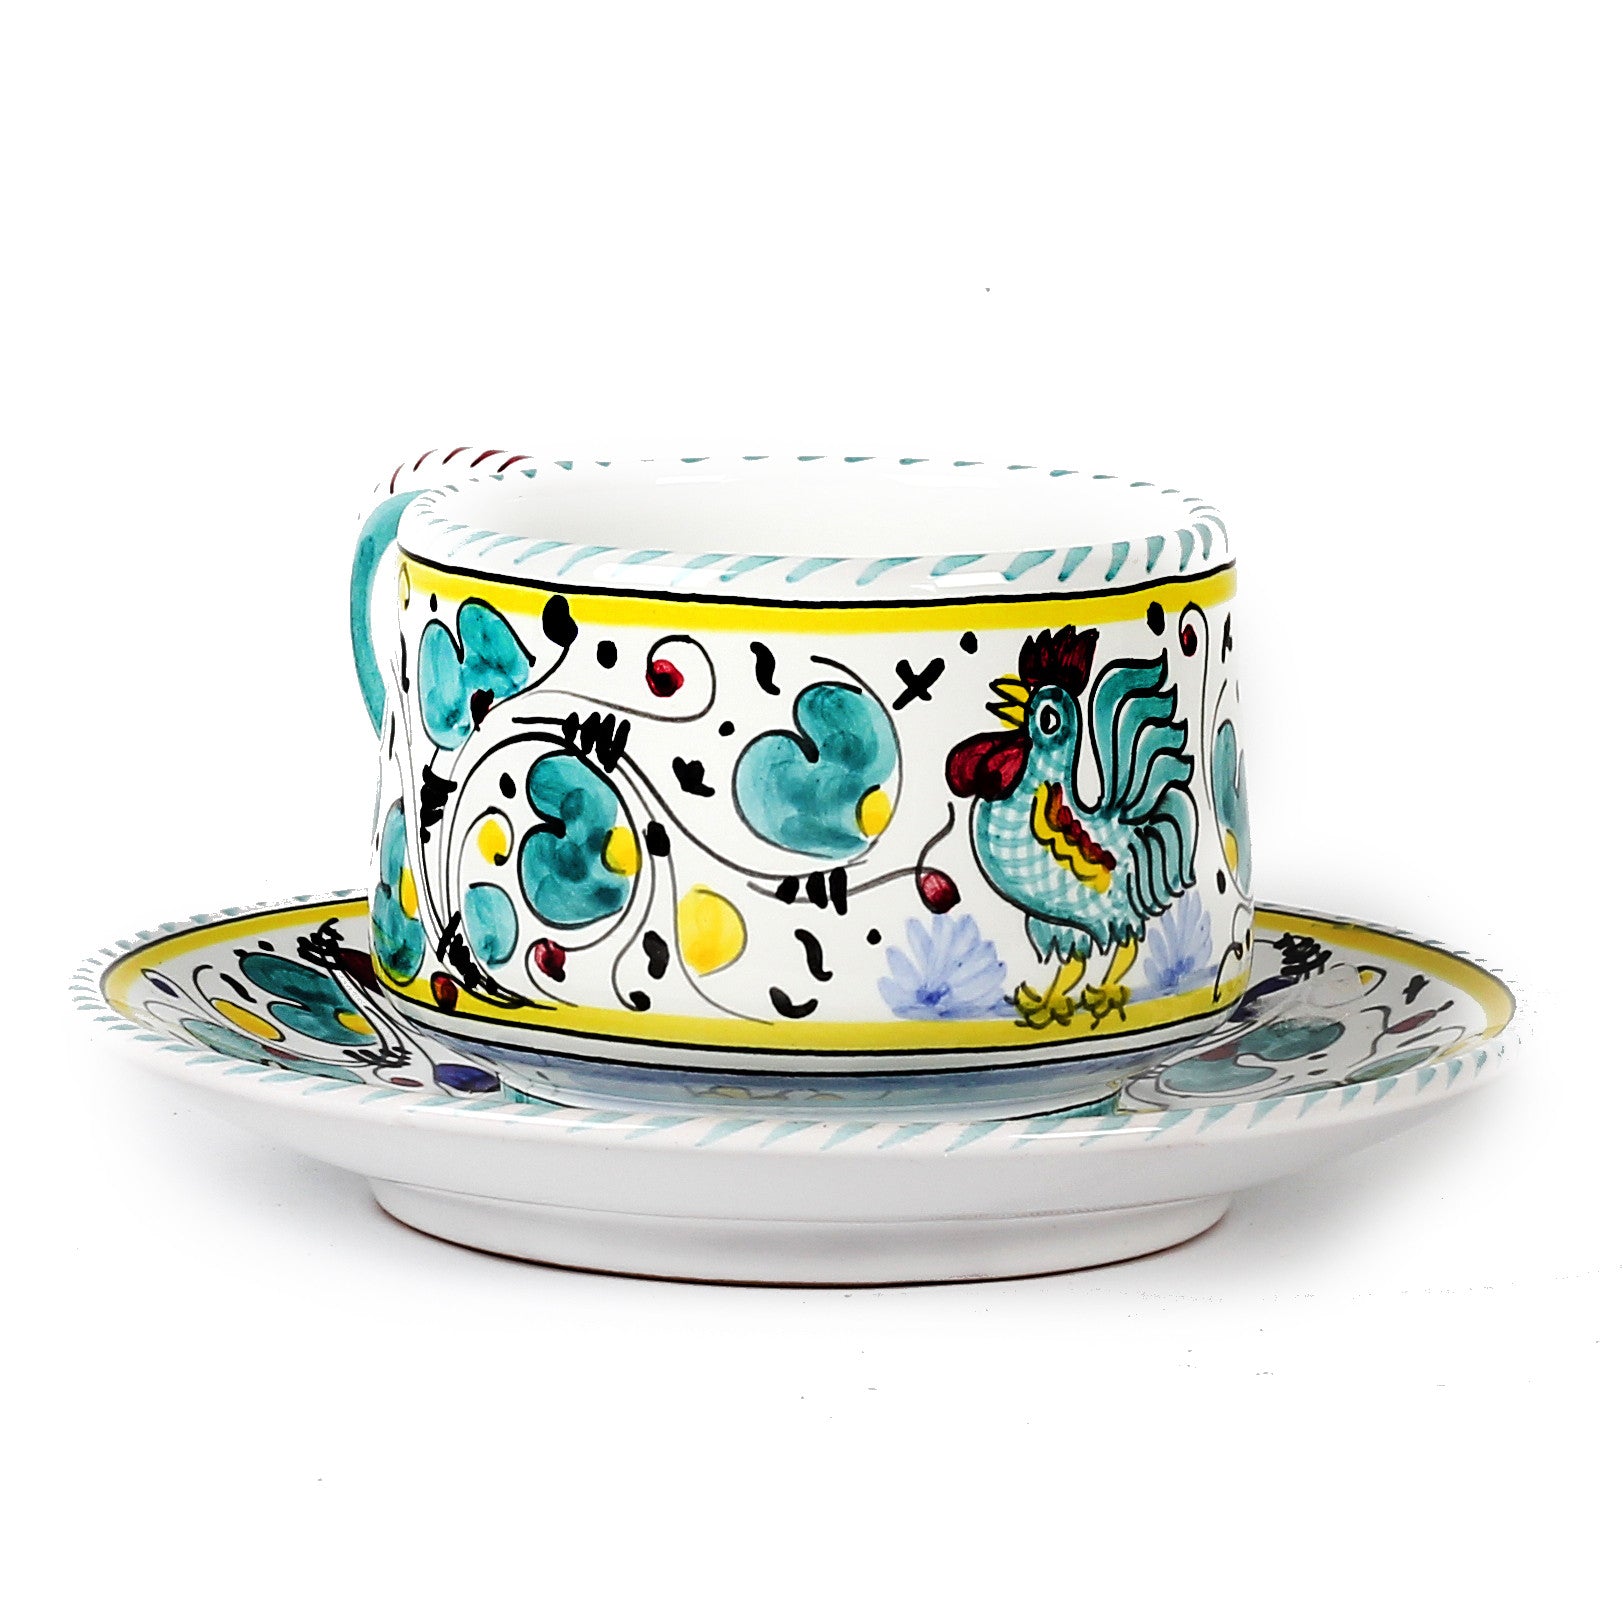 ORVIETO GREEN ROOSTER: Tea/Coffee Cup and Saucer - Artistica.com